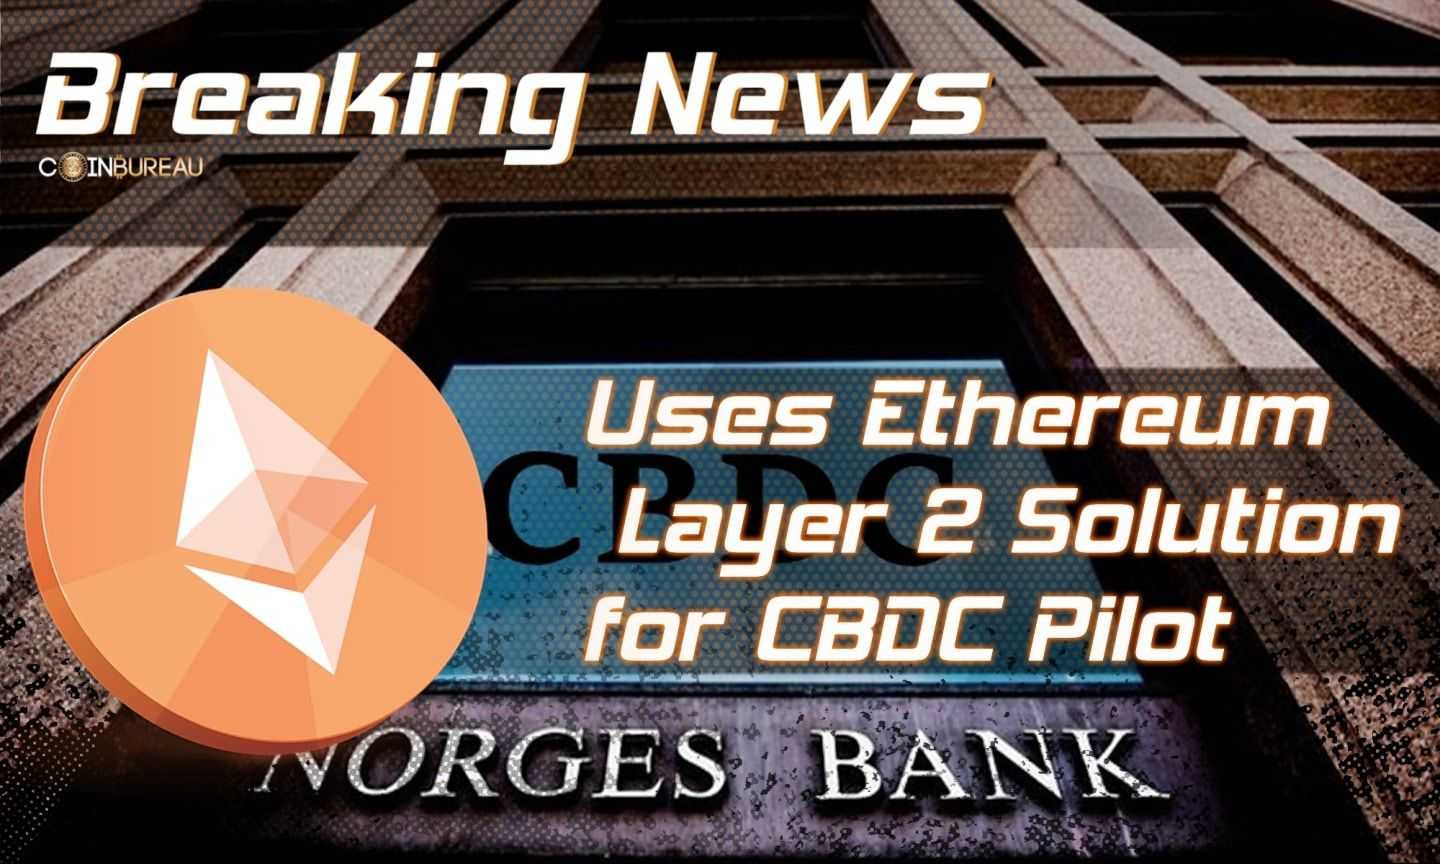 Central Bank of Norway Uses Ethereum Layer 2 Solution for CBDC Pilot